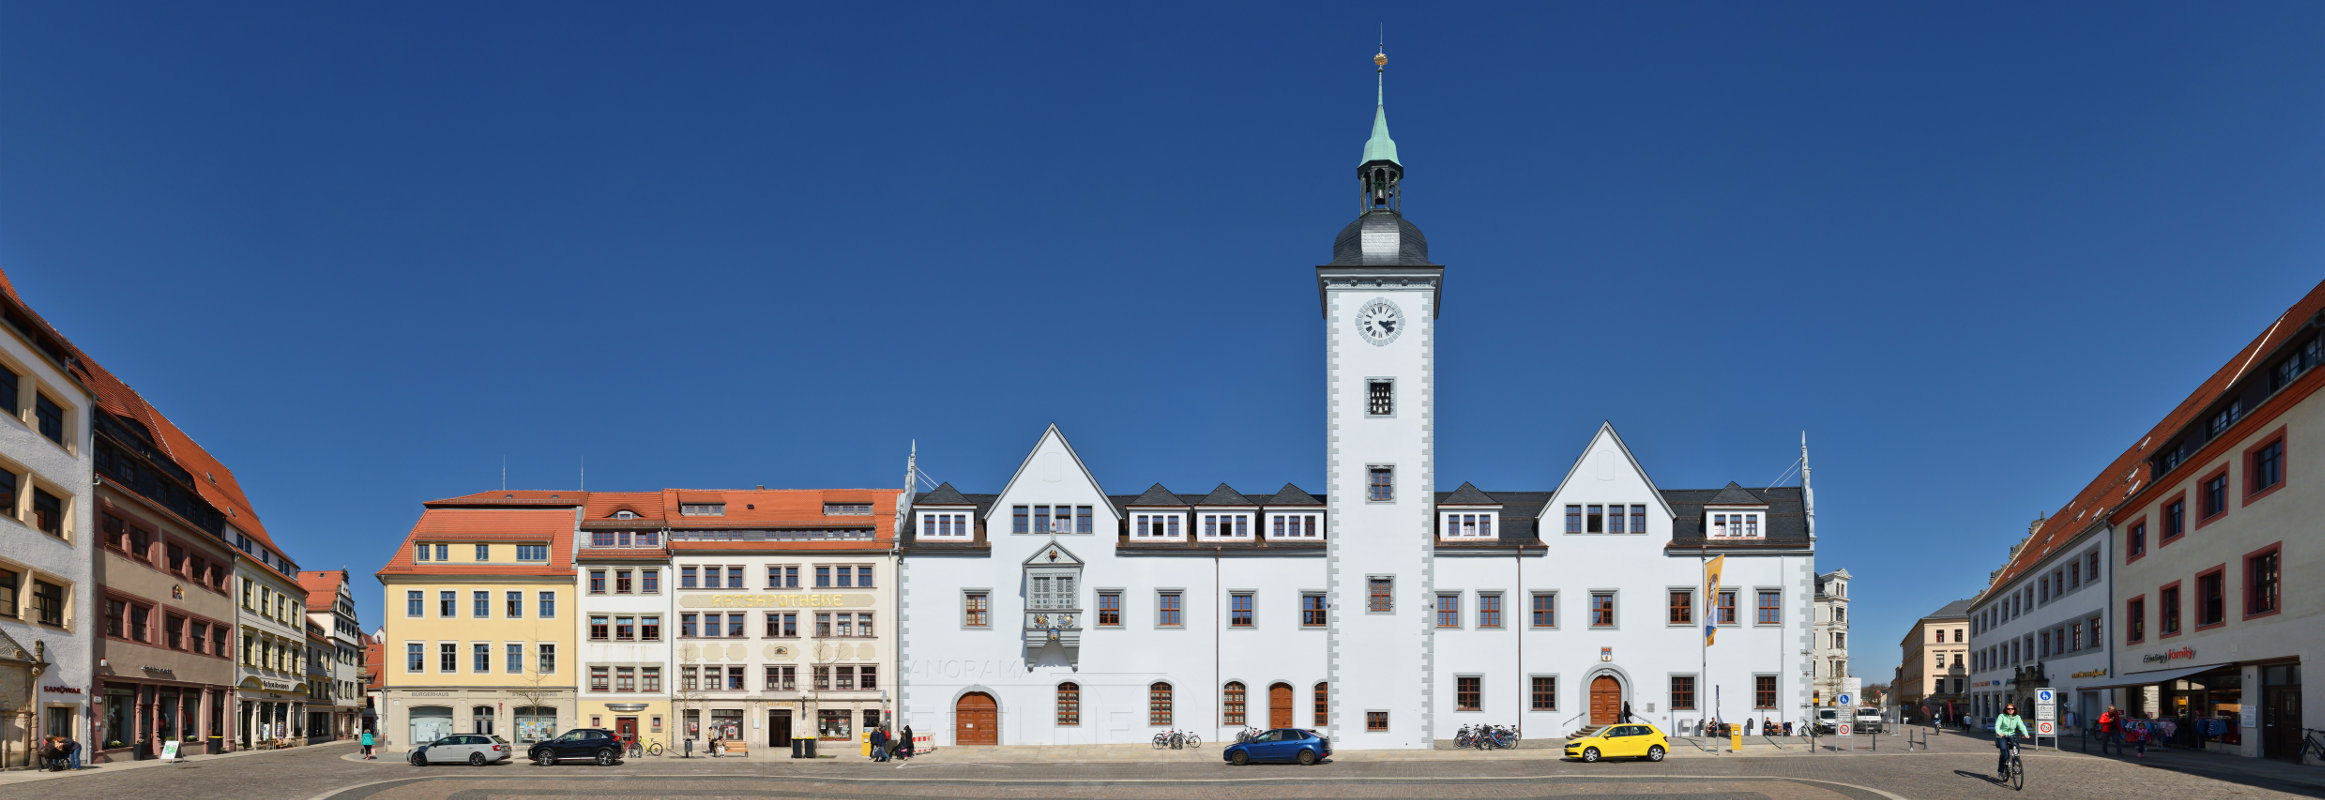 Freiberg in Saxony, Town Hall and Market panorama photografie